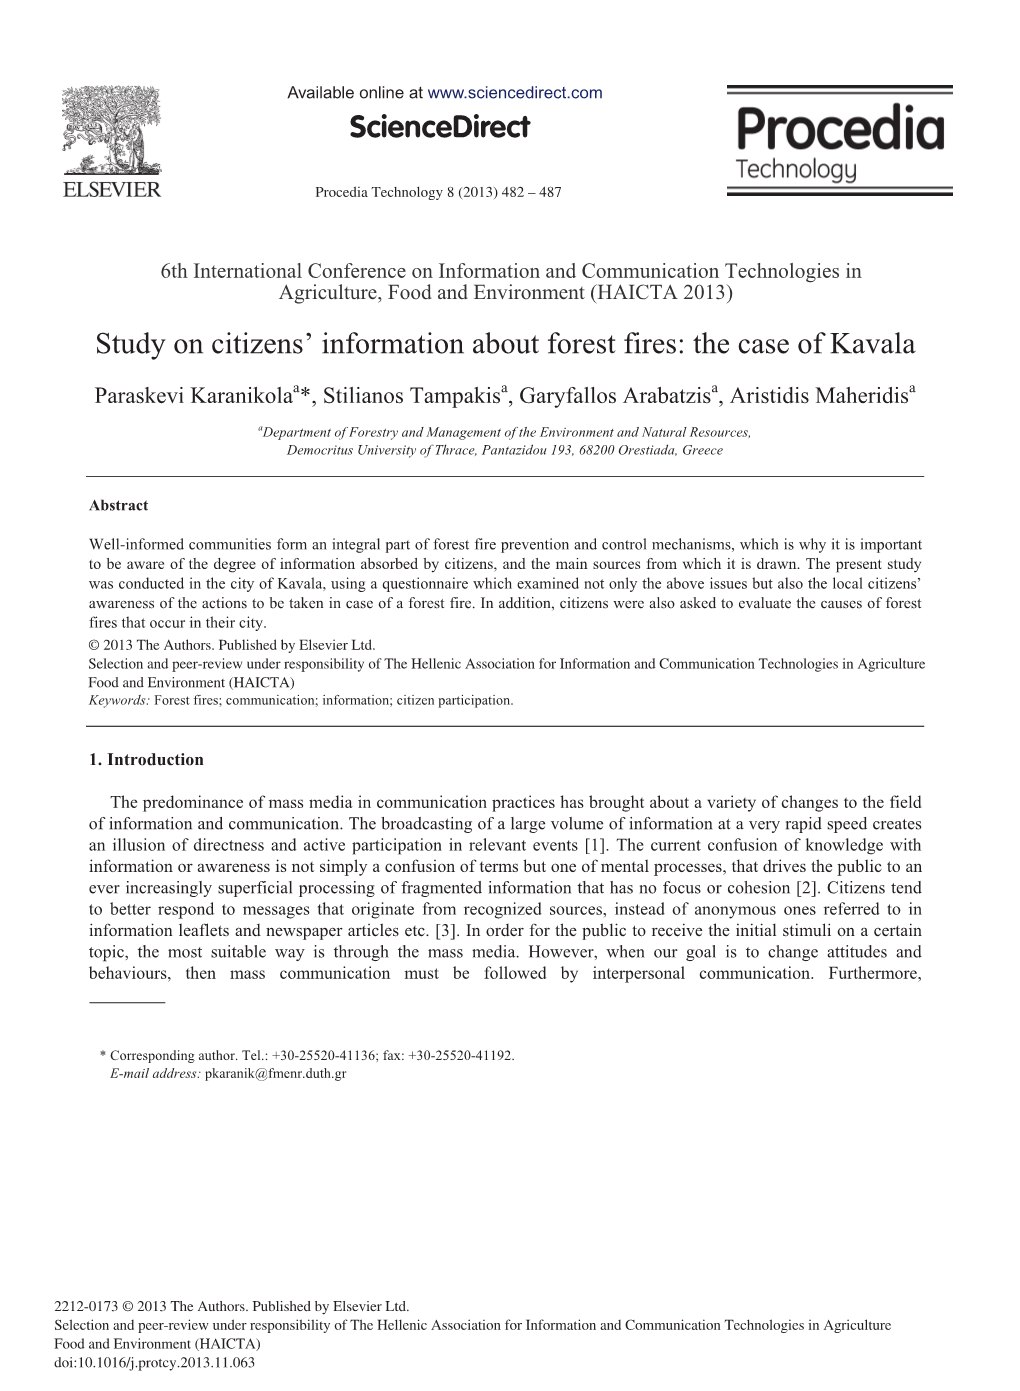 Study on Citizens' Information About Forest Fires: the Case of Kavala